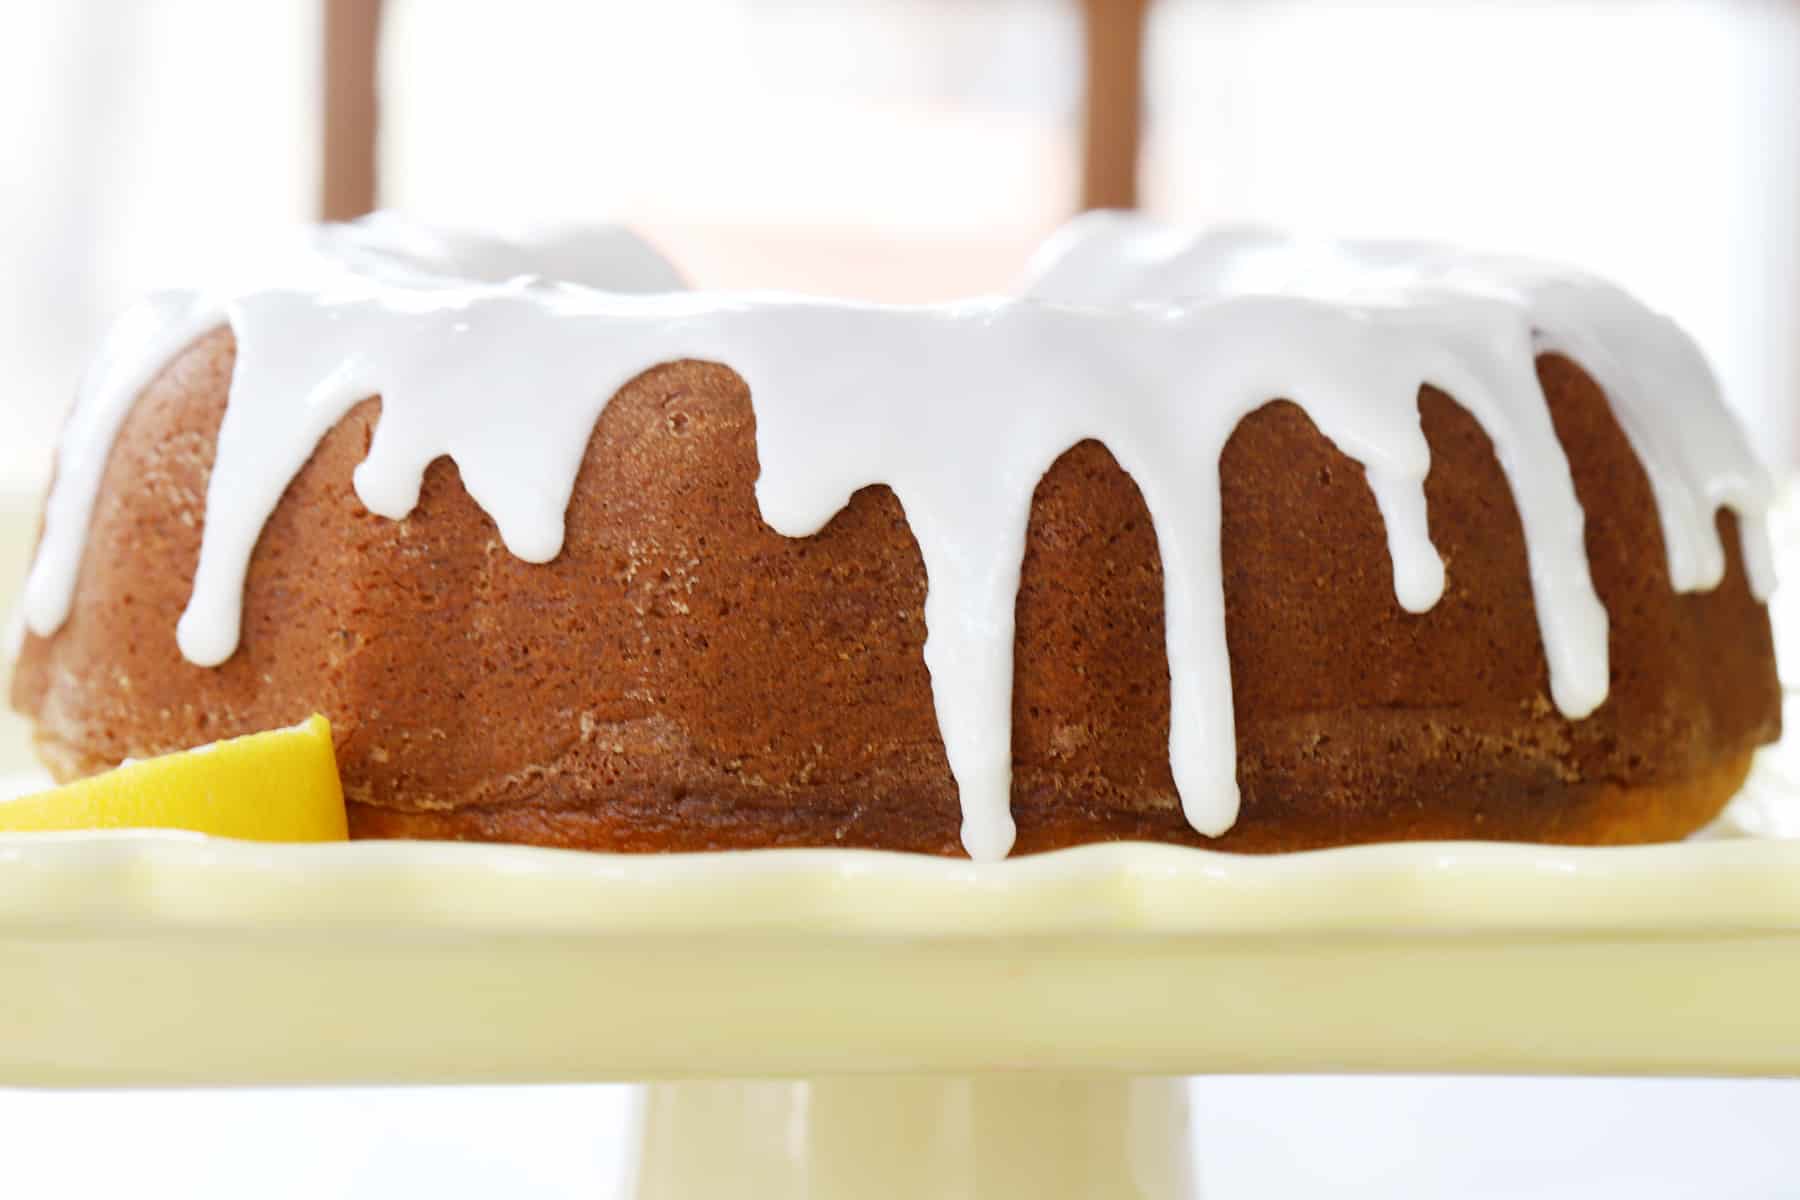 The side view of a full glazed bundt cake on a cake stand.